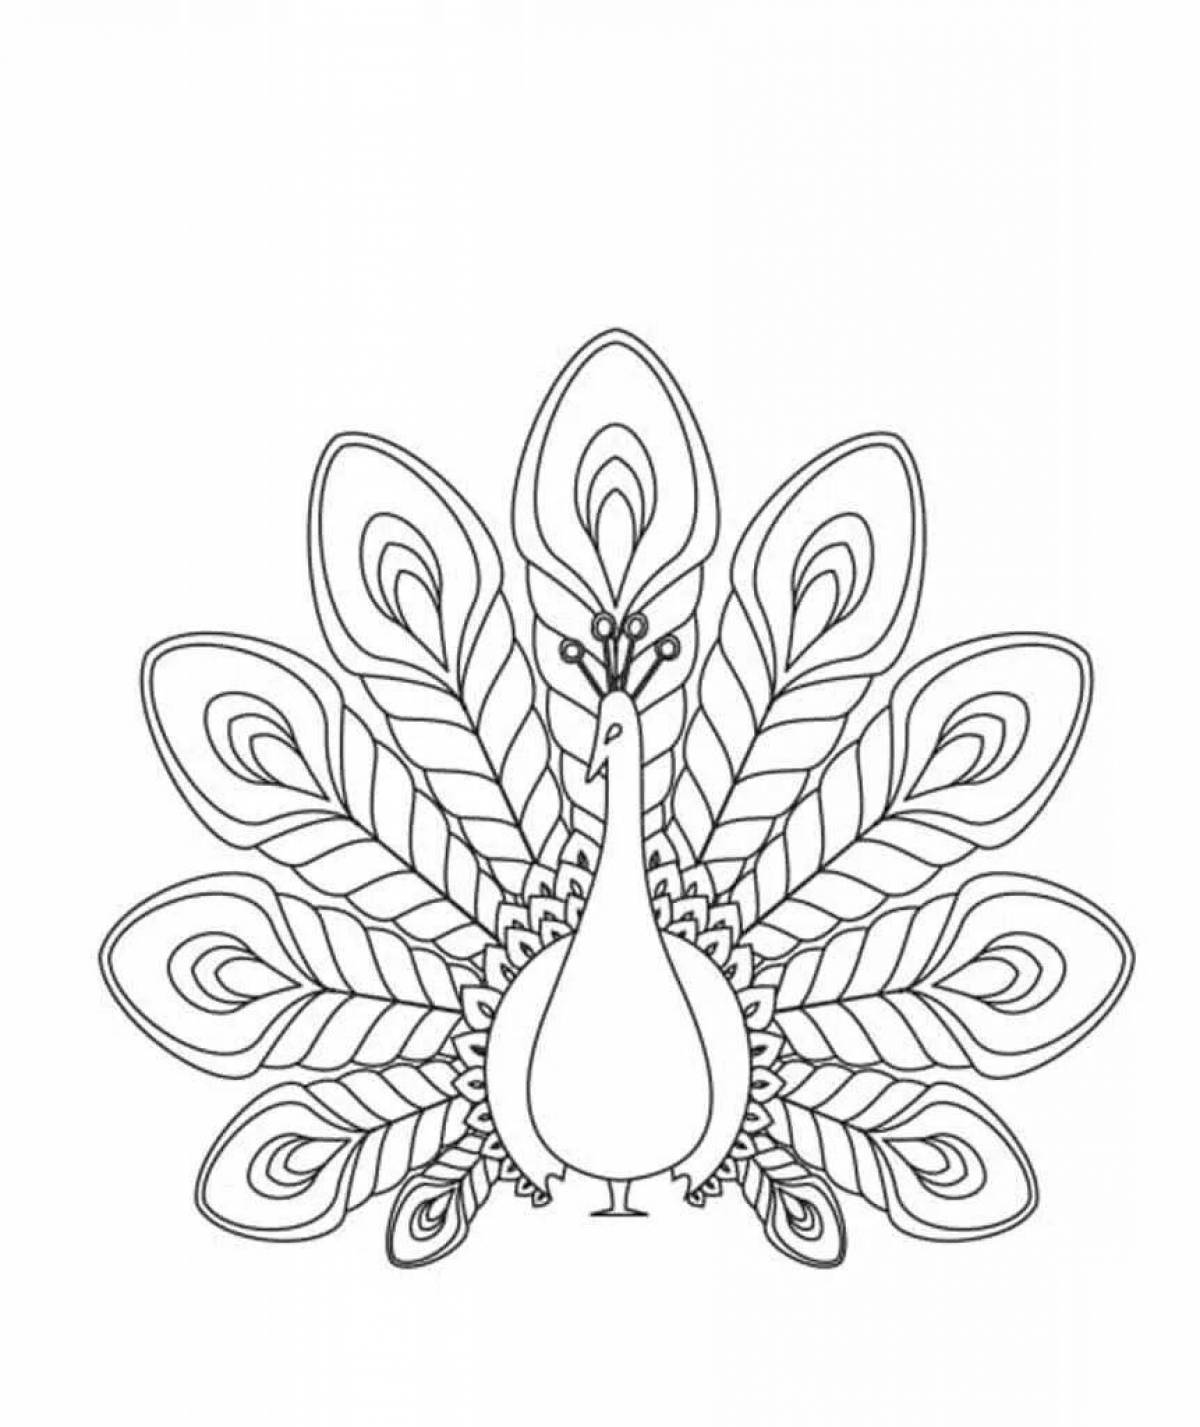 Exquisite peacock feather coloring book for kids